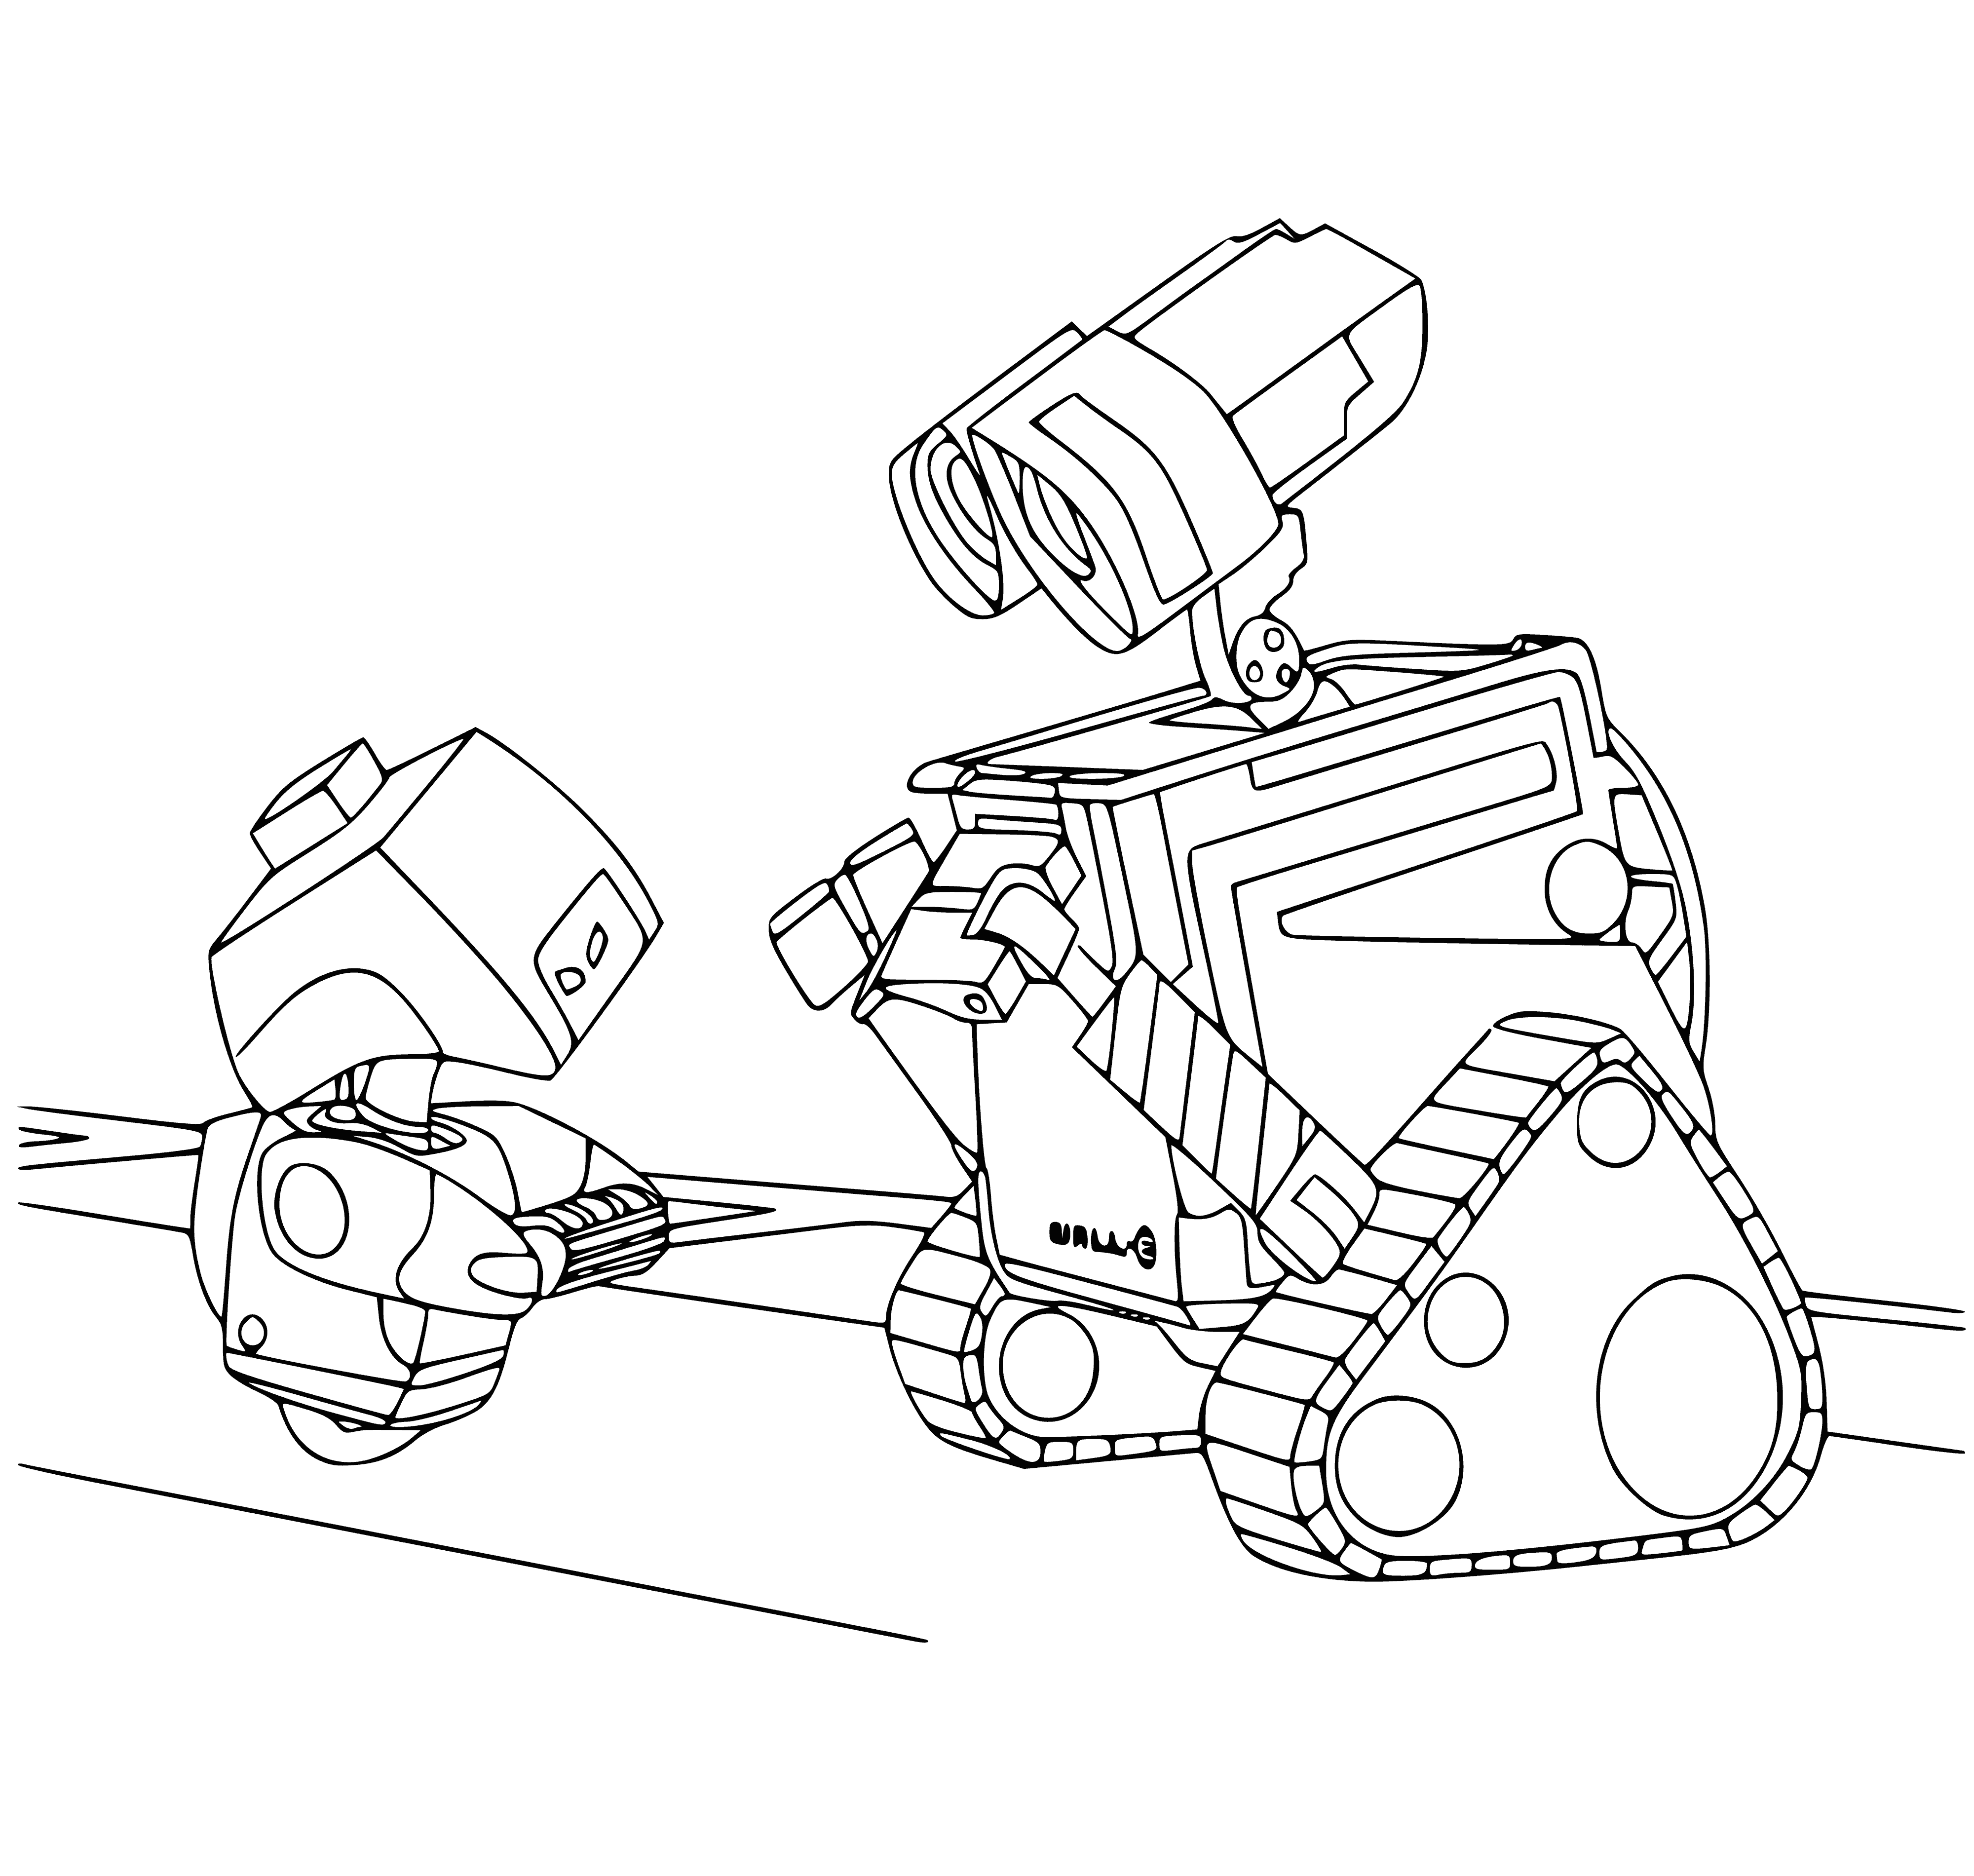 coloring page: Desolate, ruined remains of human city with only Wall-E robots. Trash & wreckage cover the ground in Wall-E Valley from Pixar movie.